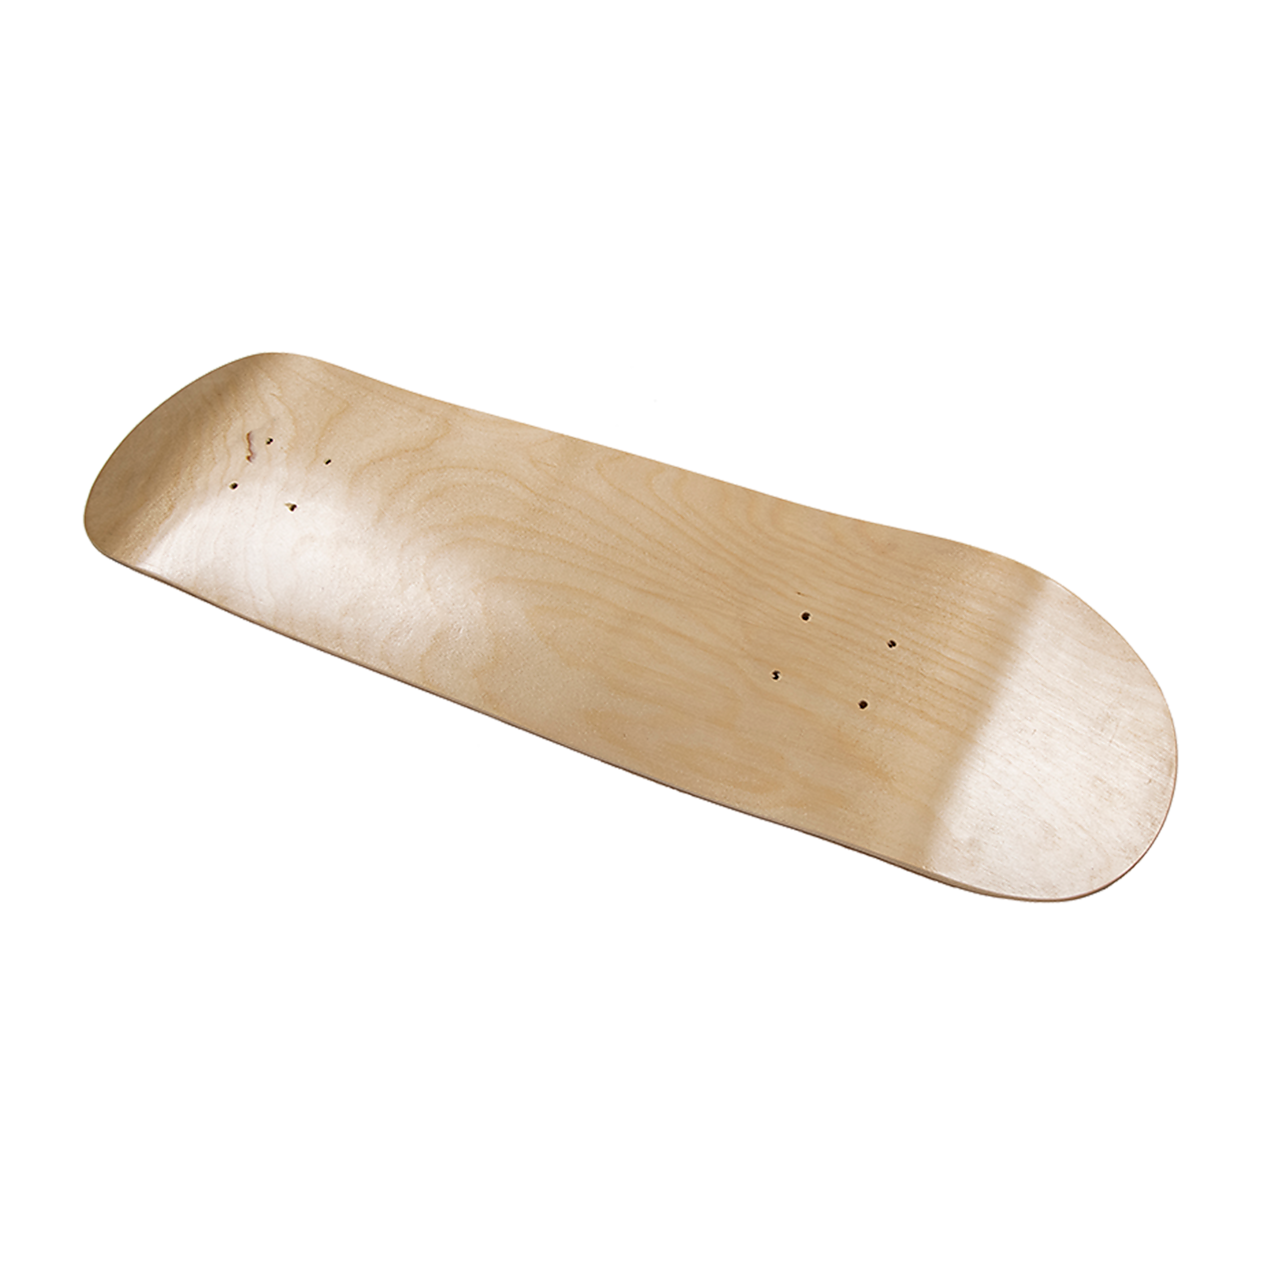 Maple Blank Double Concave Skateboards Natural Skate Deck Board 8